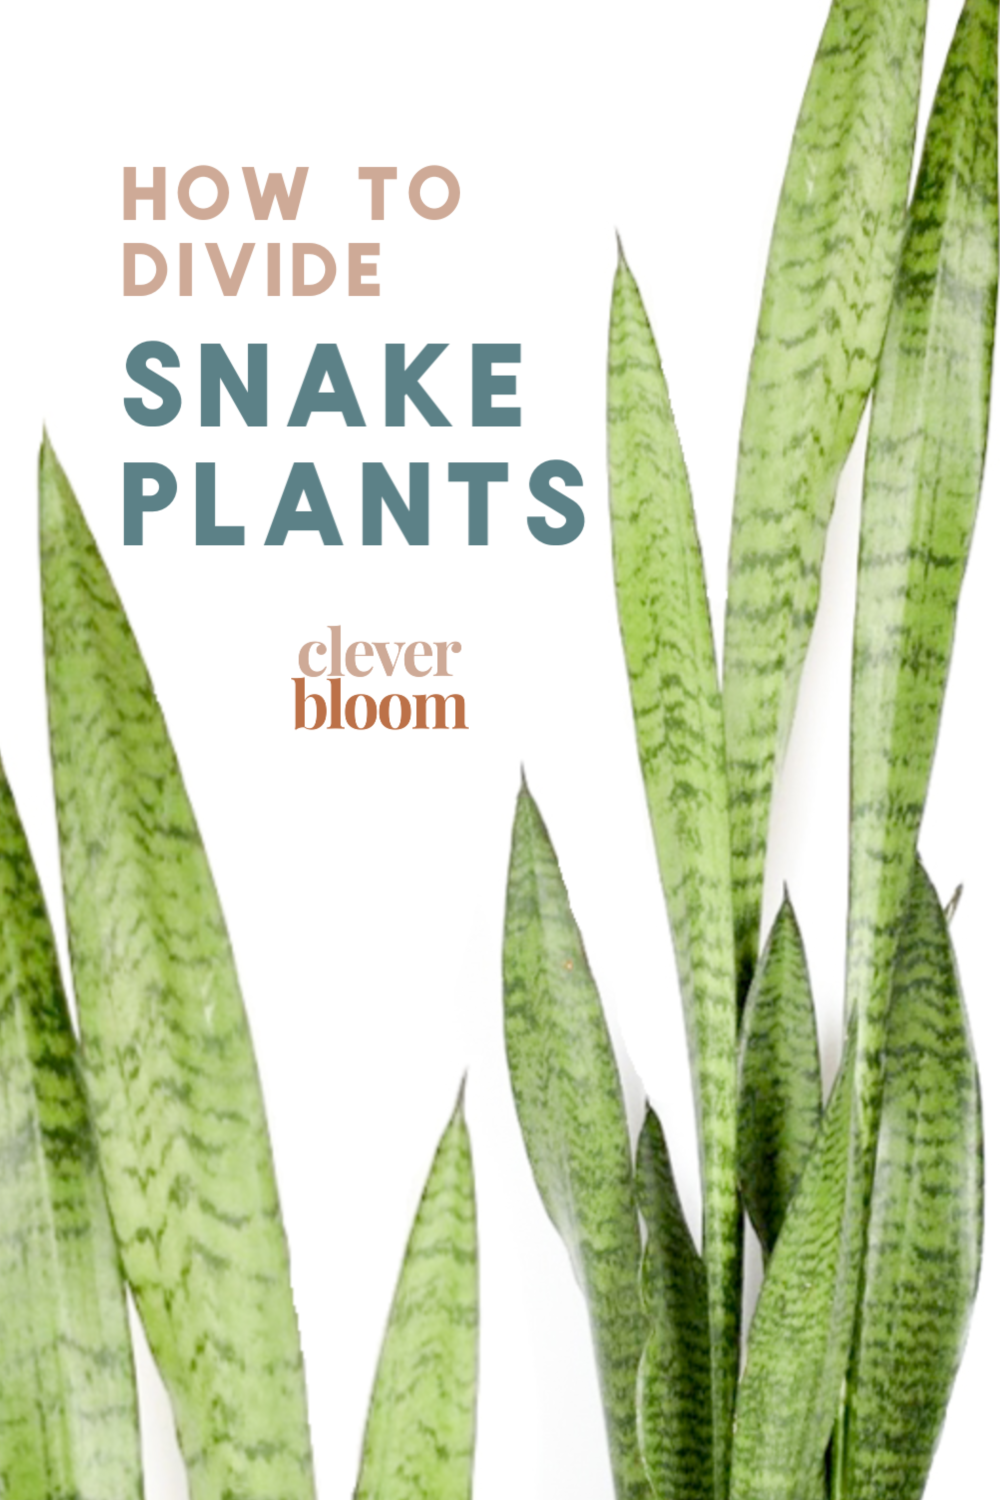 Looking to propagate your snake plant the easy way? We'll show you, step by step, how to divide Sansevieria. With just a few things (you probably have around the house) you'll be on your way to propagating in no time! Clever Bloom #snakeplants